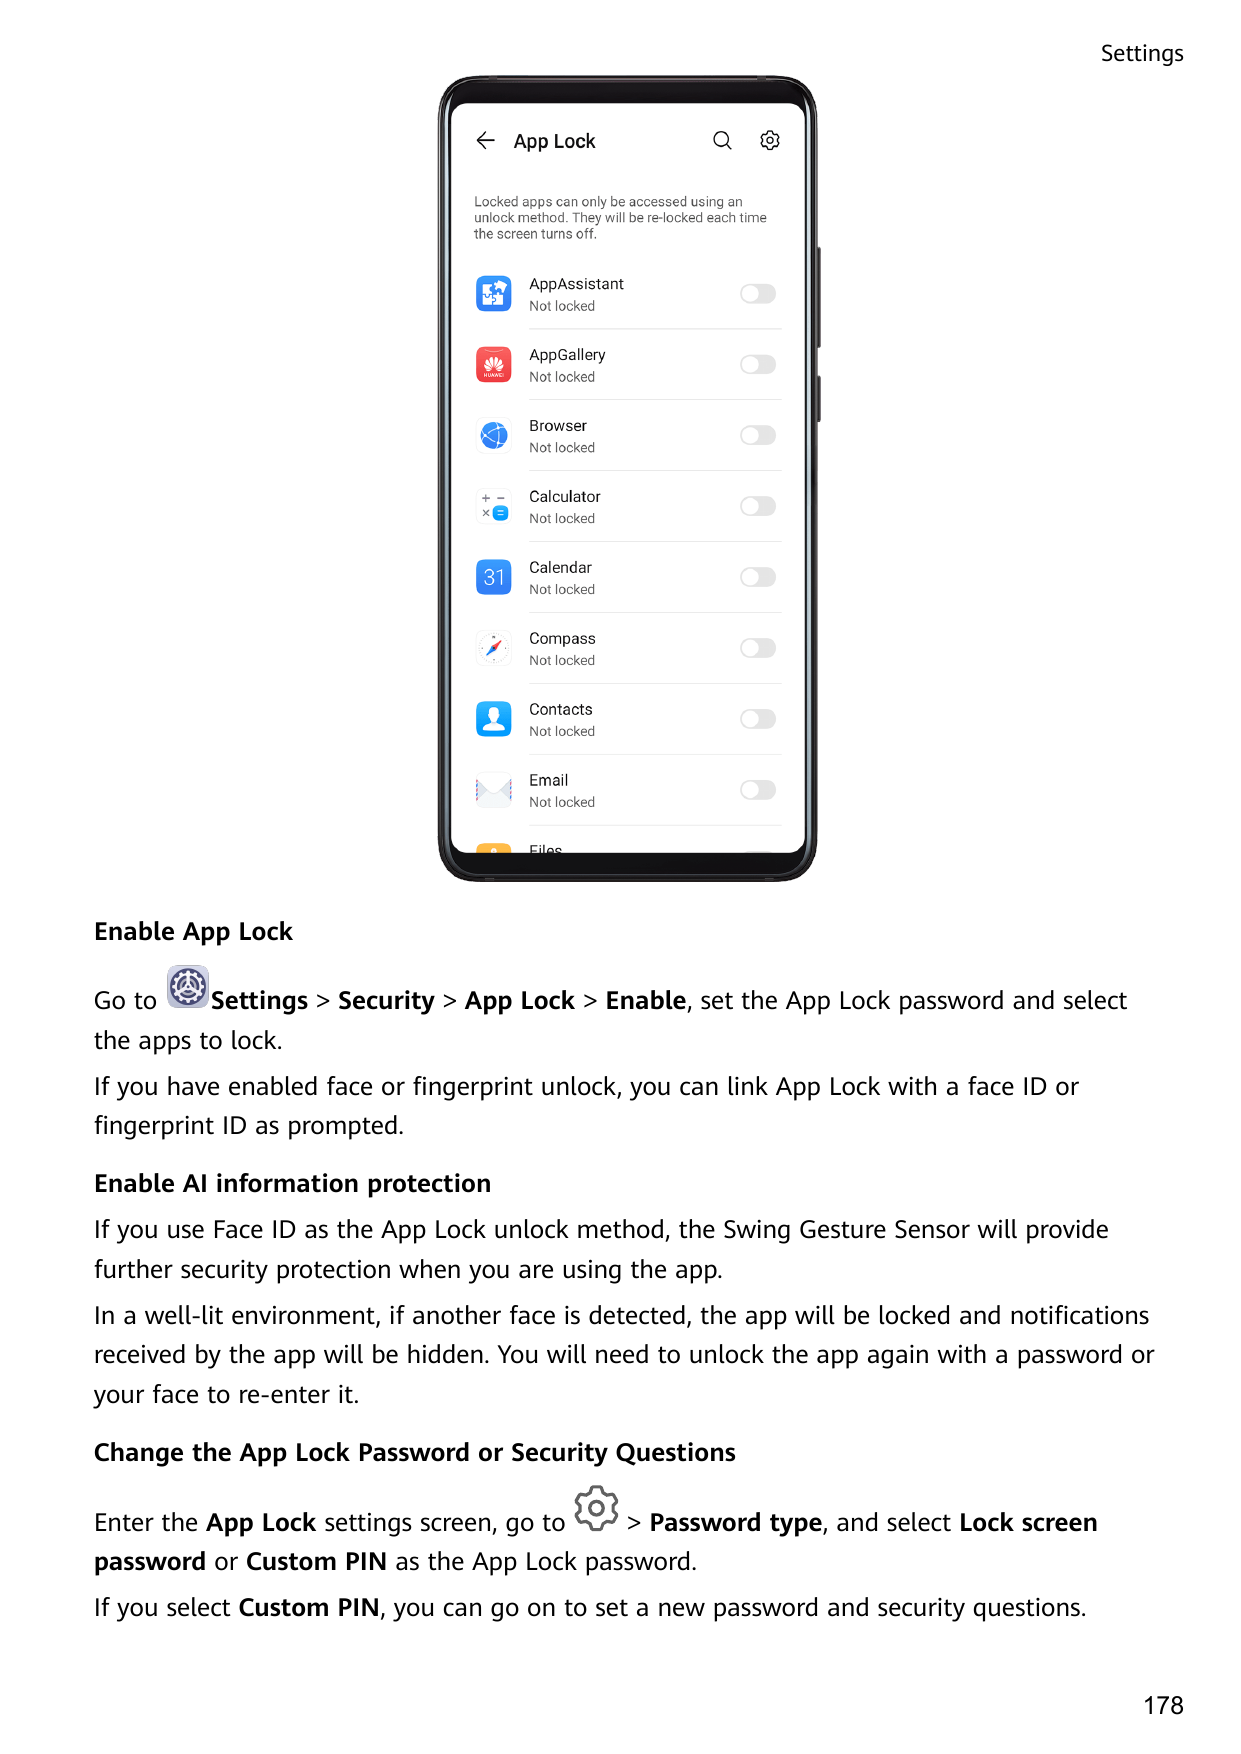 SettingsEnable App LockGo toSettings > Security > App Lock > Enable, set the App Lock password and selectthe apps to lock.If you